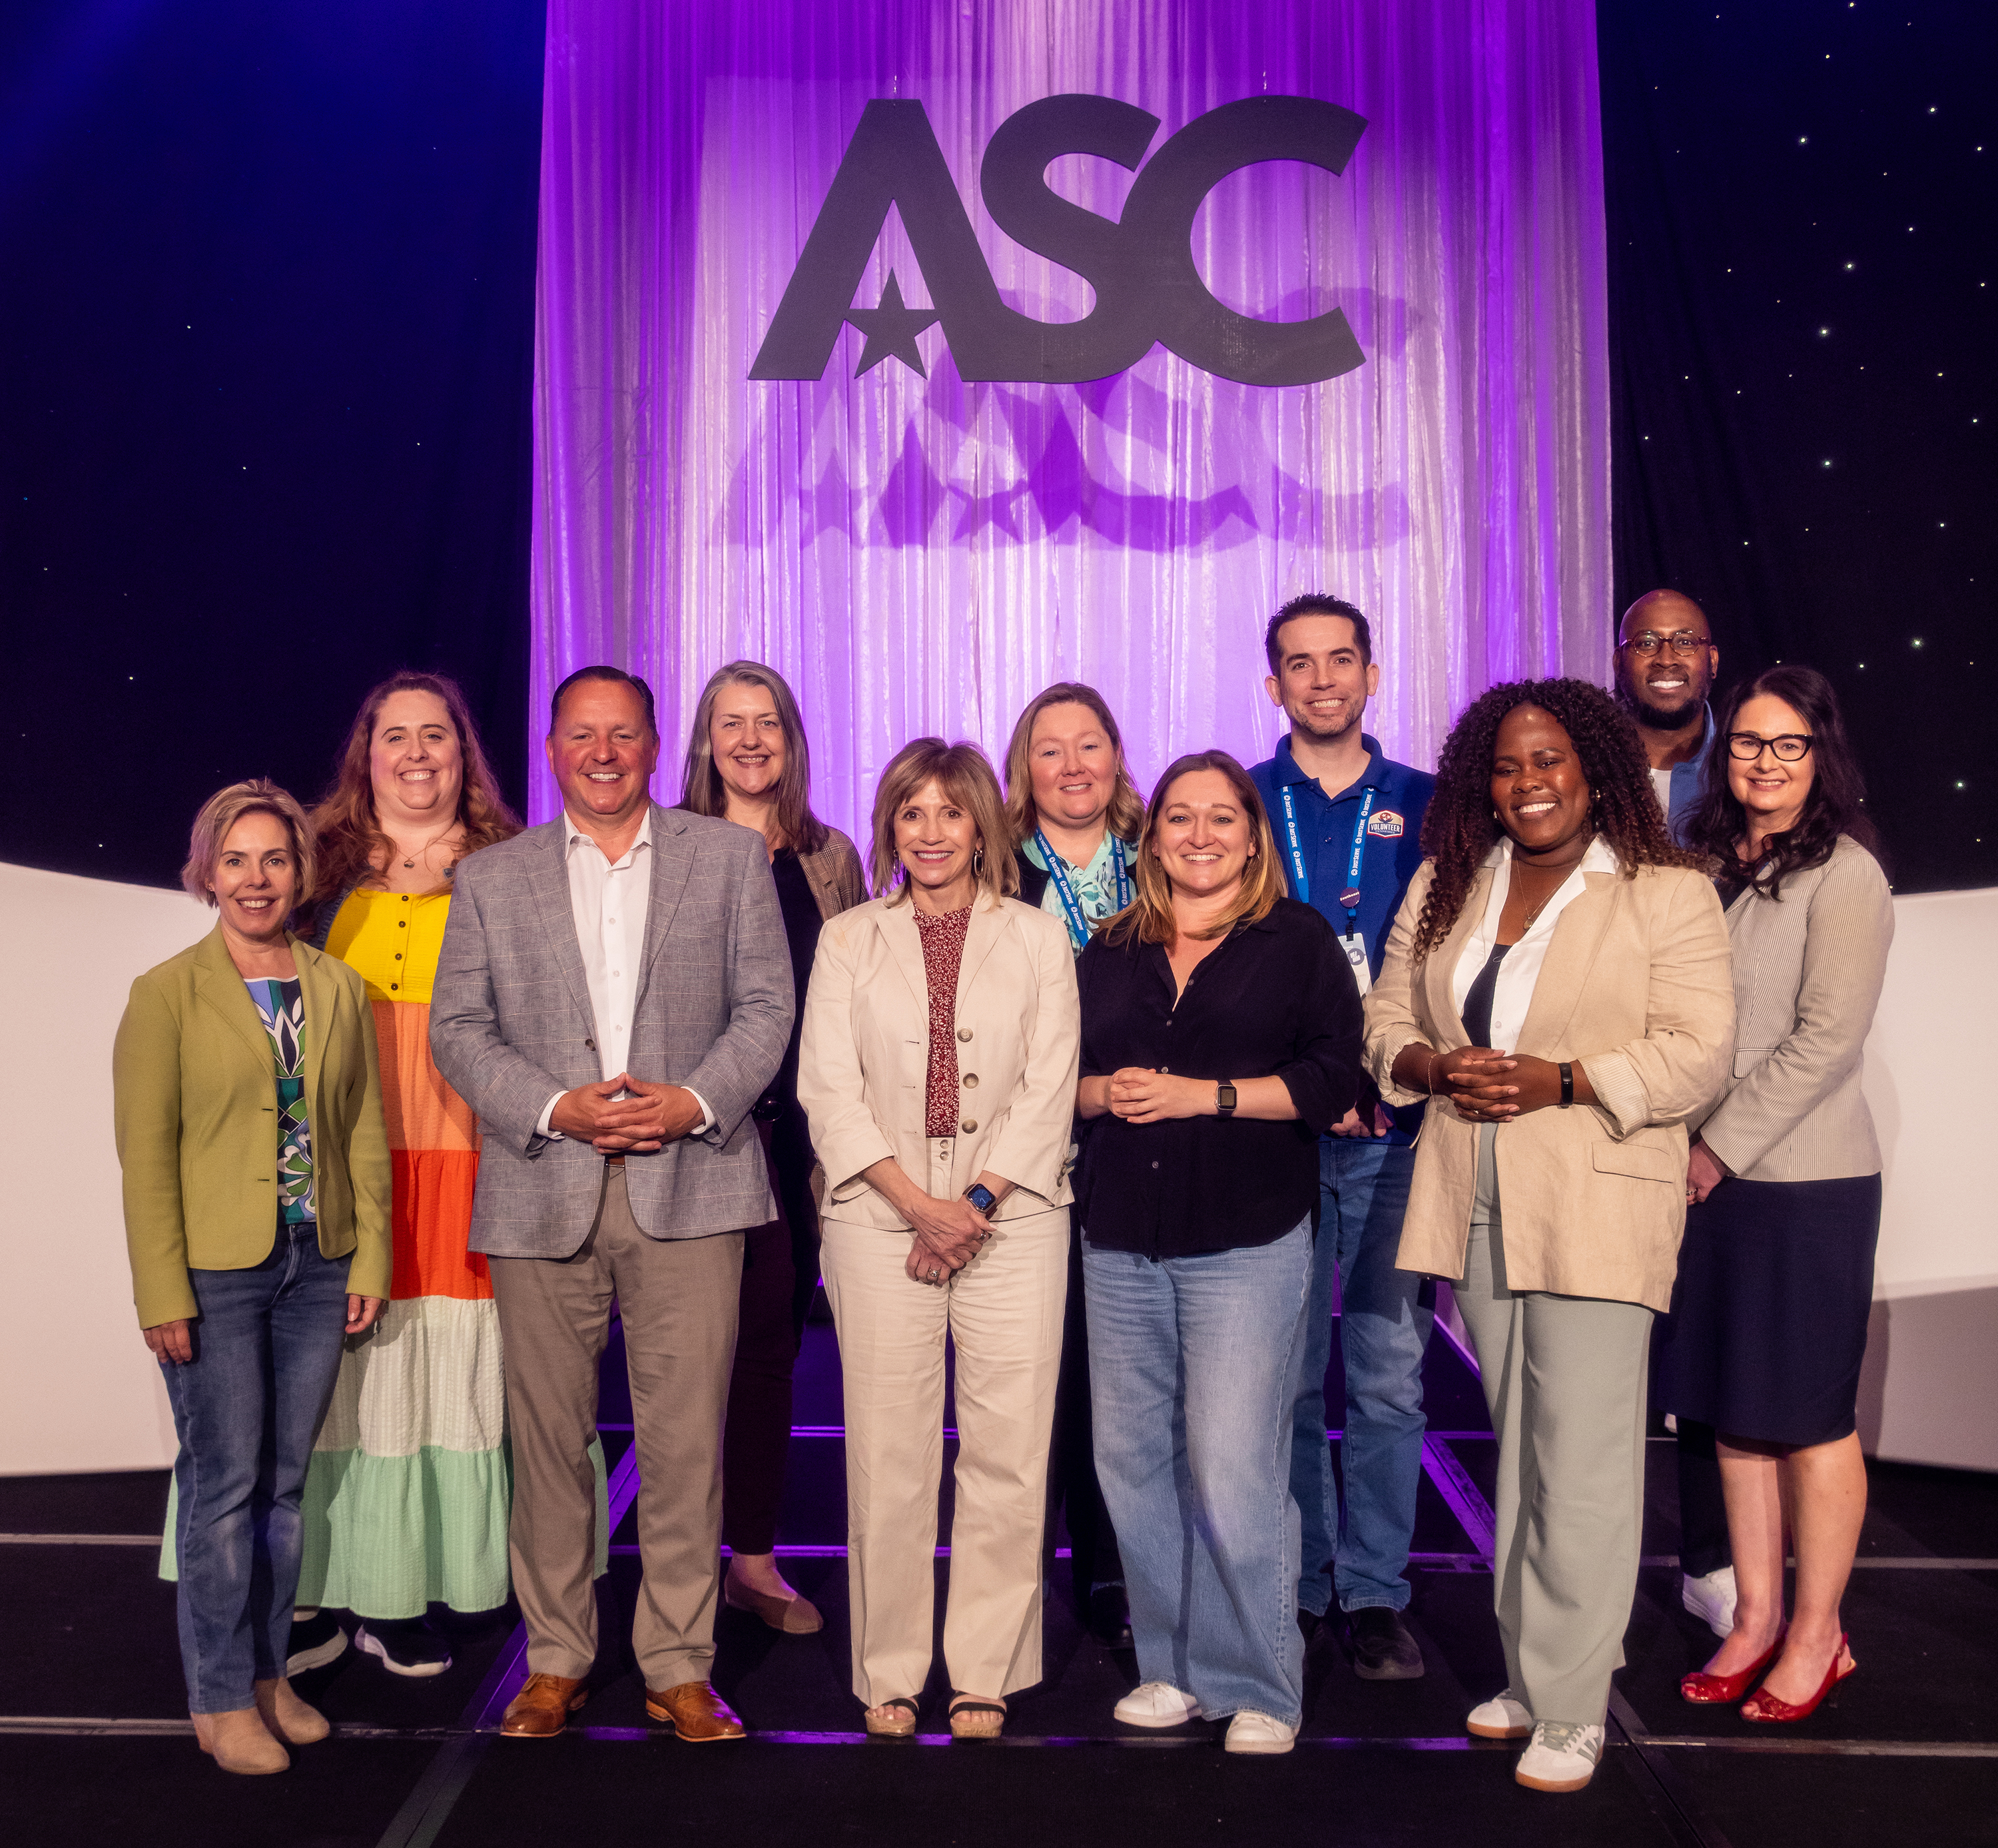 group photo of some of ASC's board members